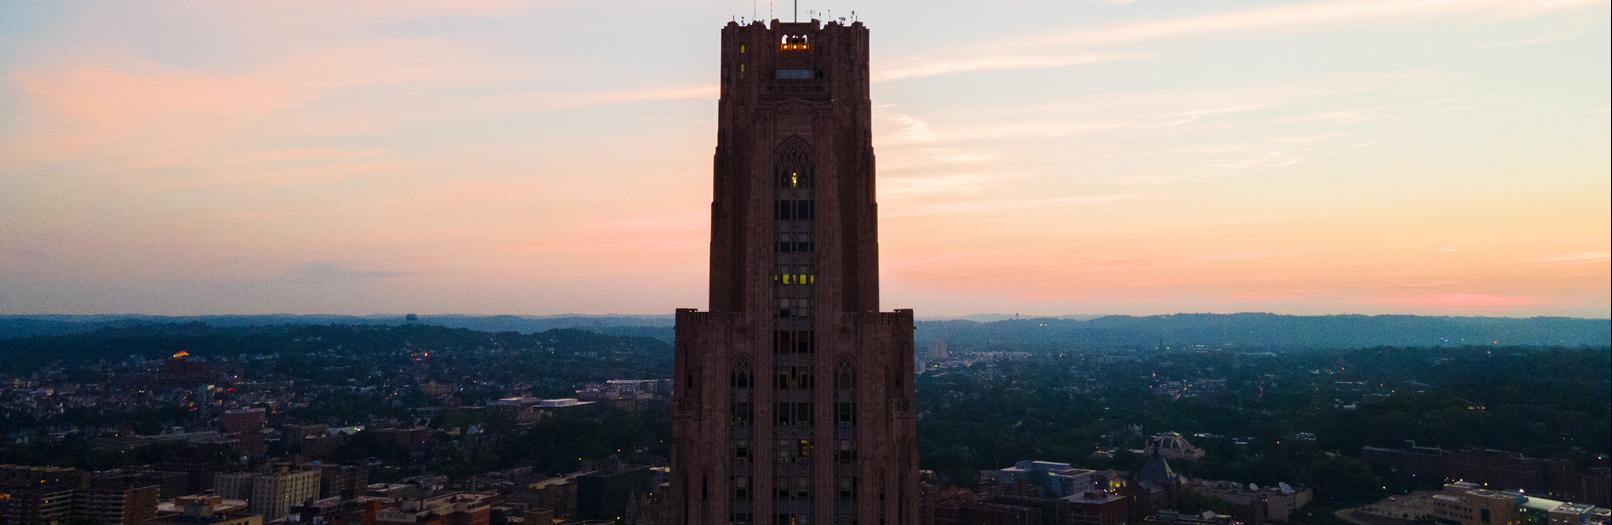 The Cathedral of Learning, a stately tan building rising over a city in front of a sunset.